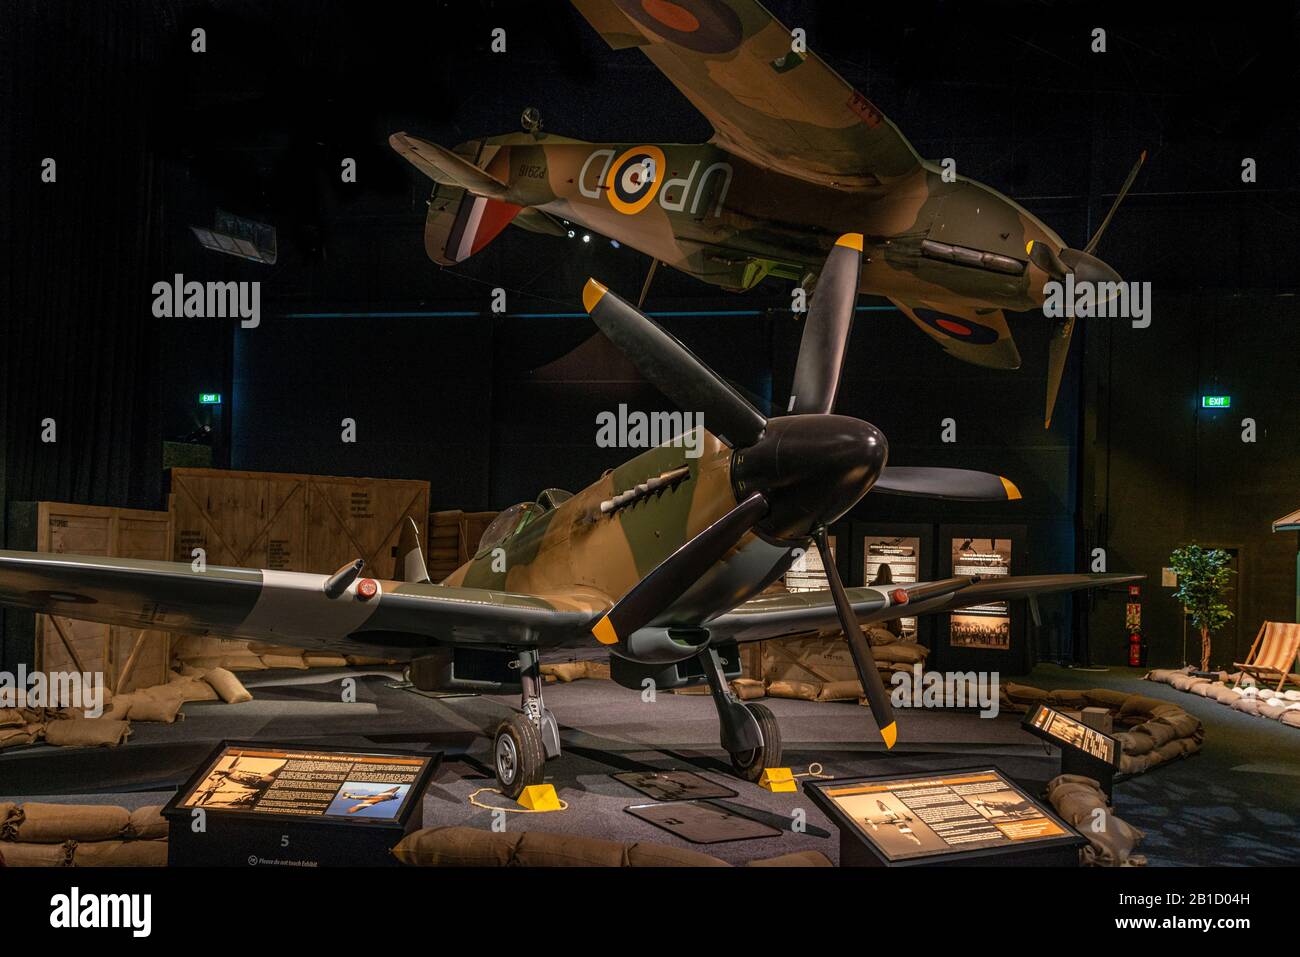 A Spitfire and Hurricane at the Battle of Britain diorama, in the Aviation Heritage Museum at Omaka, Marlborough New Zealand. Stock Photo